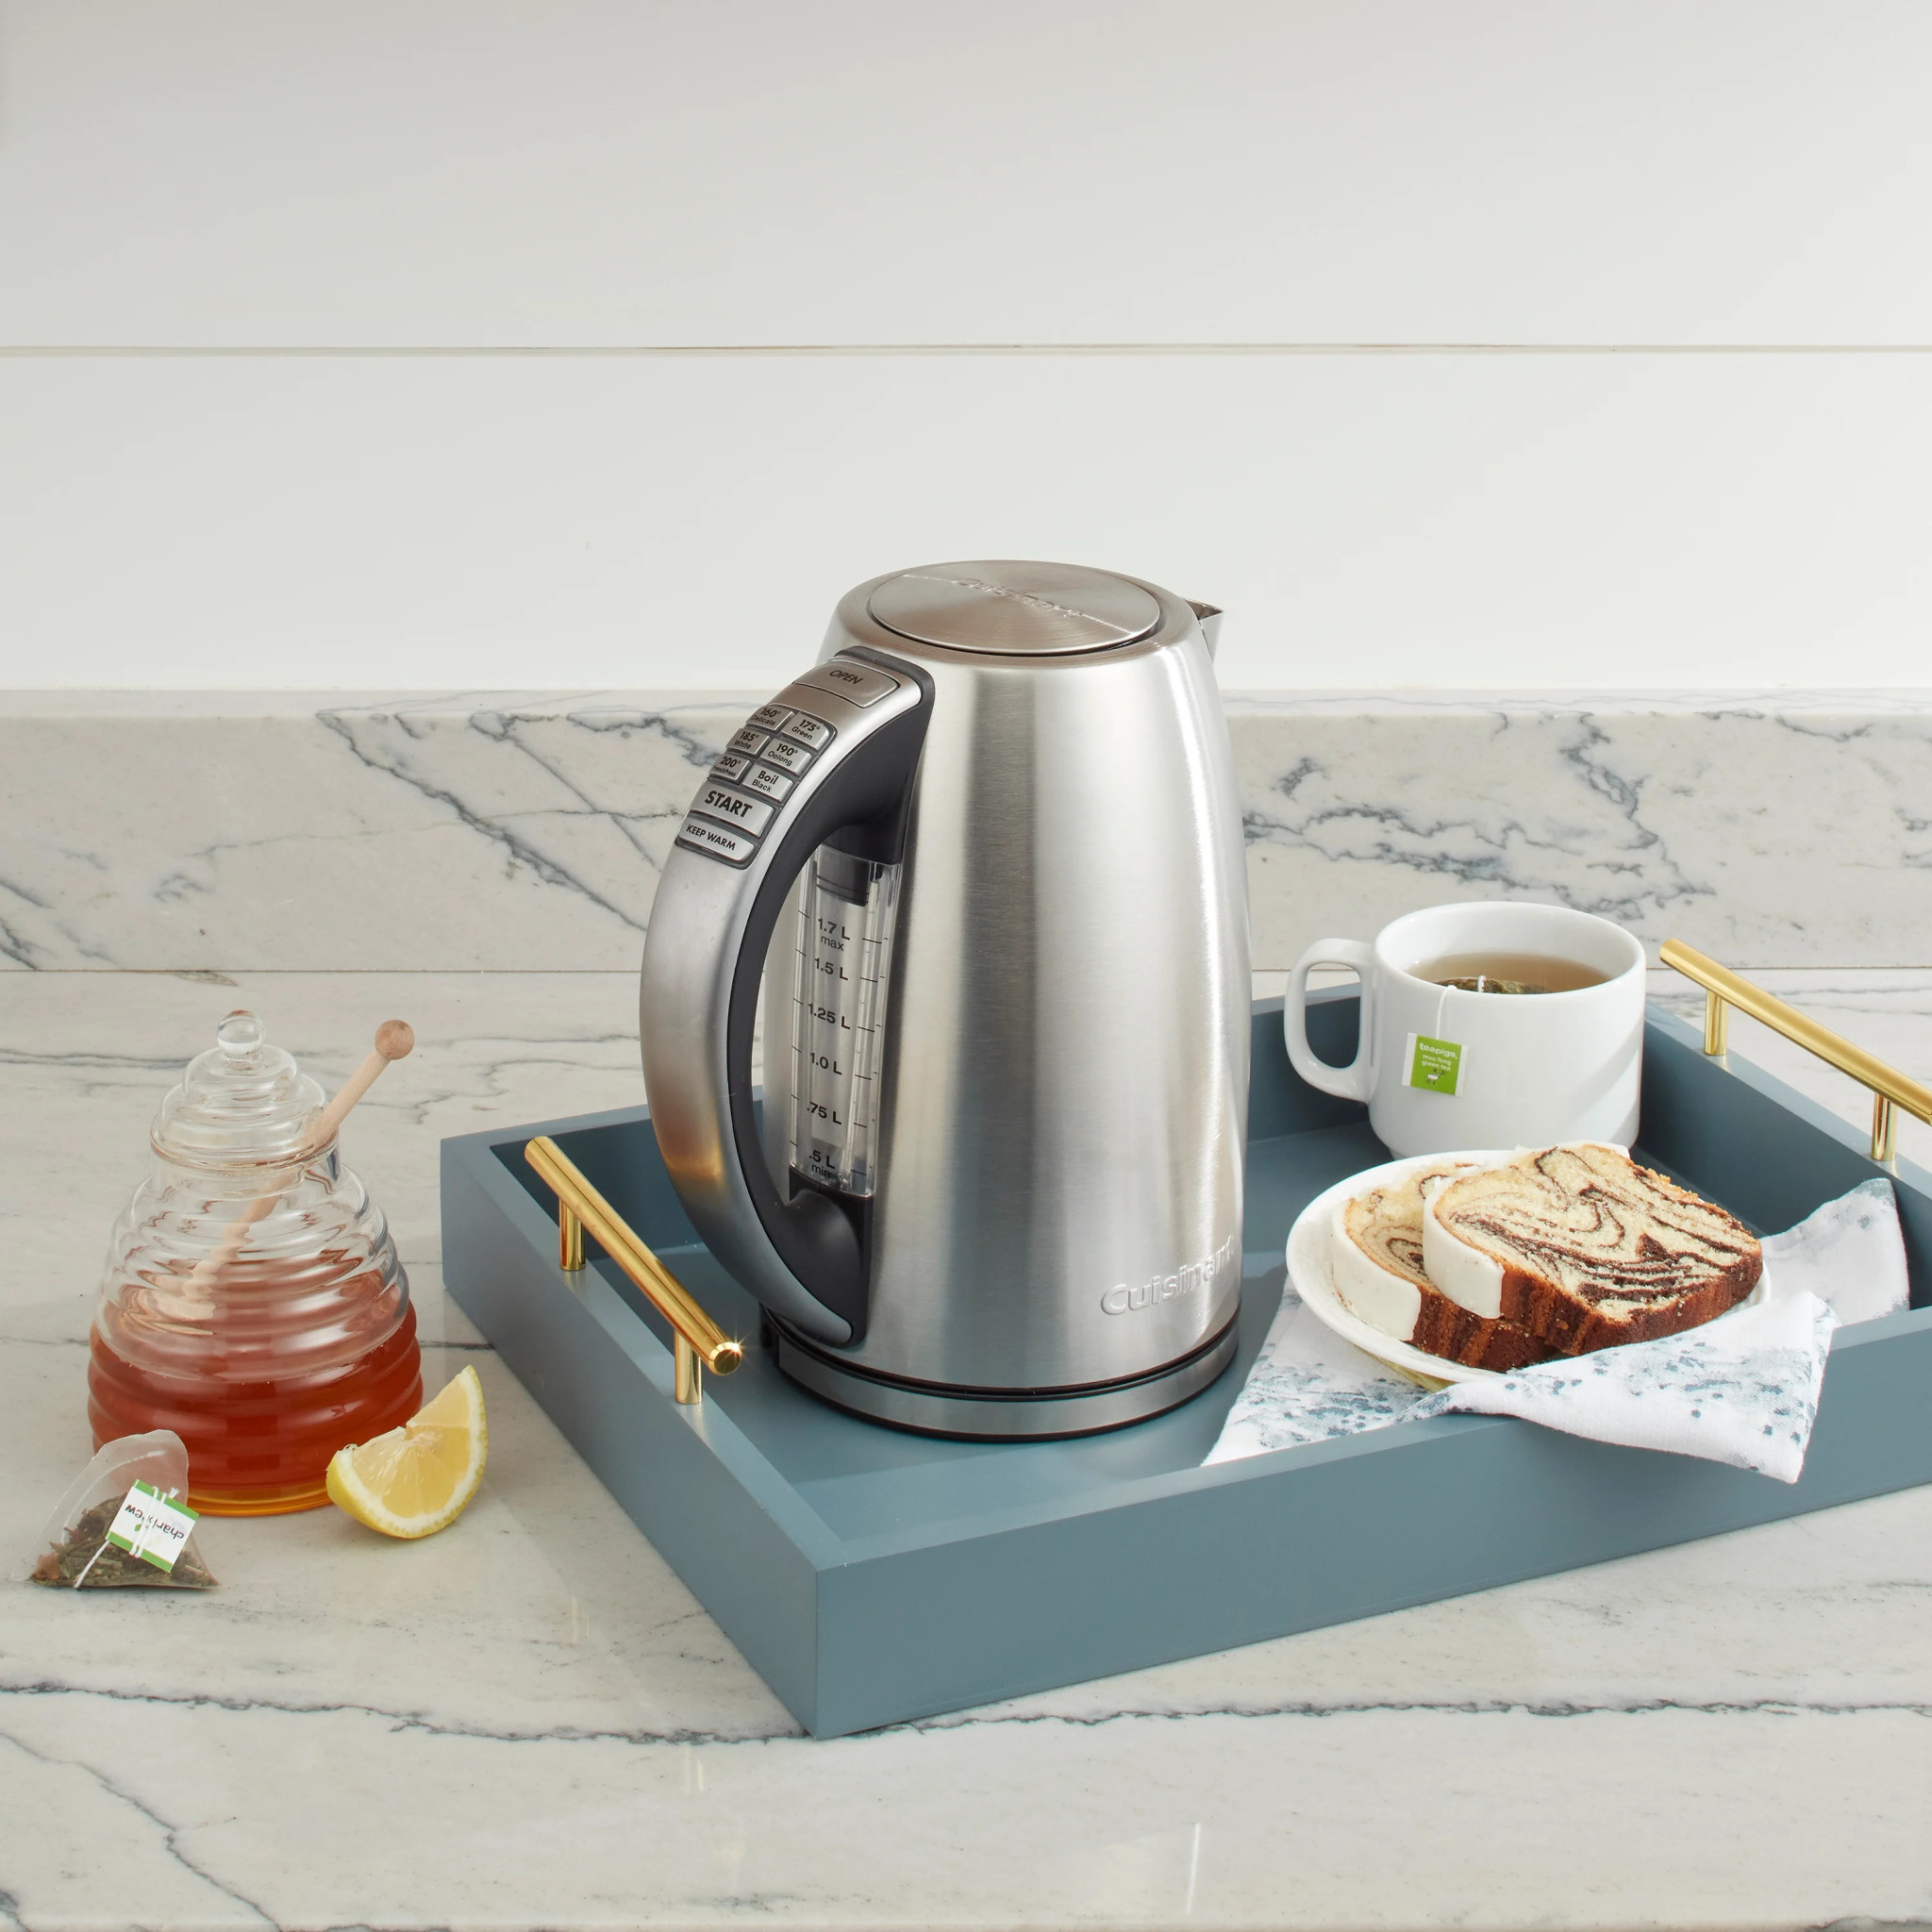 Prime Day 2022 deals: Save on the Cuisinart cordless electric kettle 